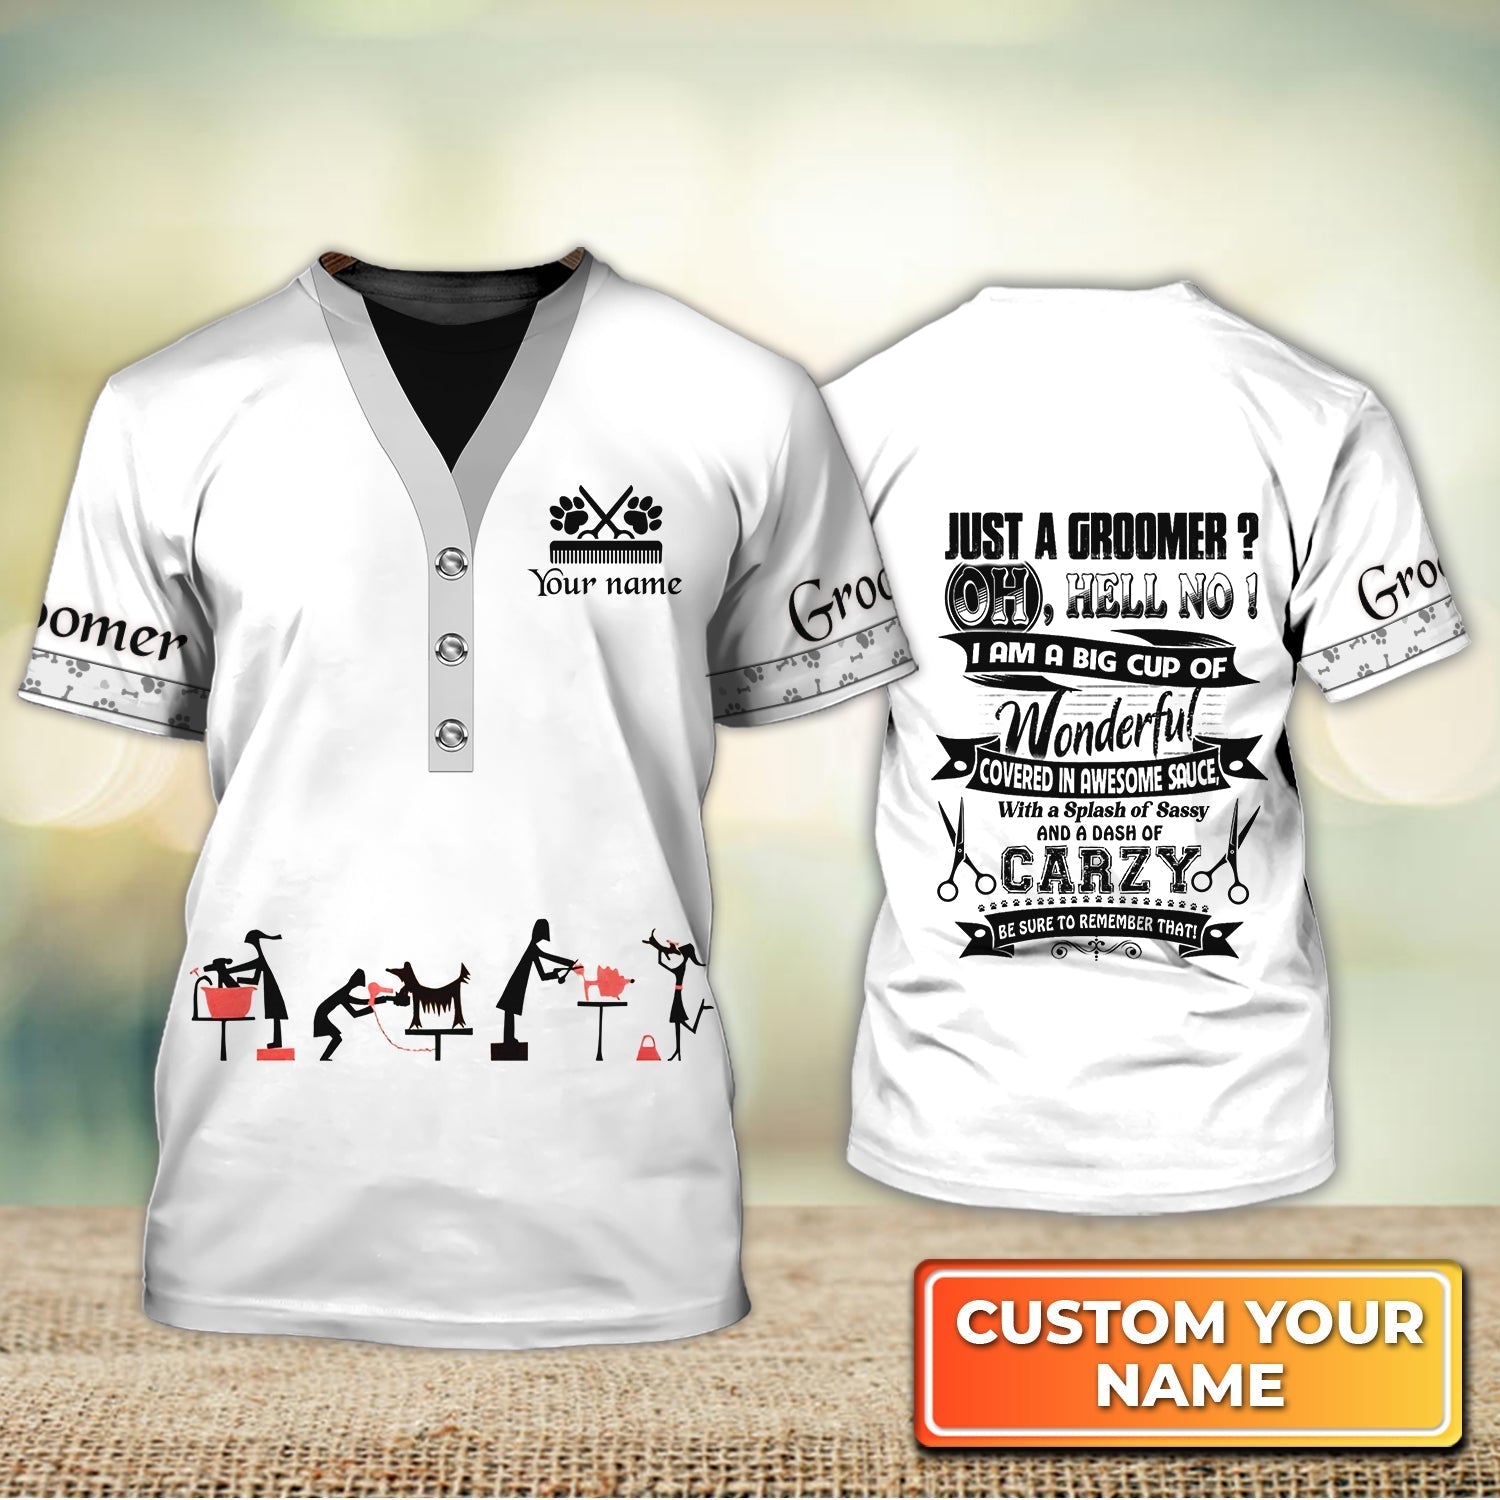 Personalized Groomer Shirts Just A Dog Groomer Pet Groomer Uniform White Groomer Shop